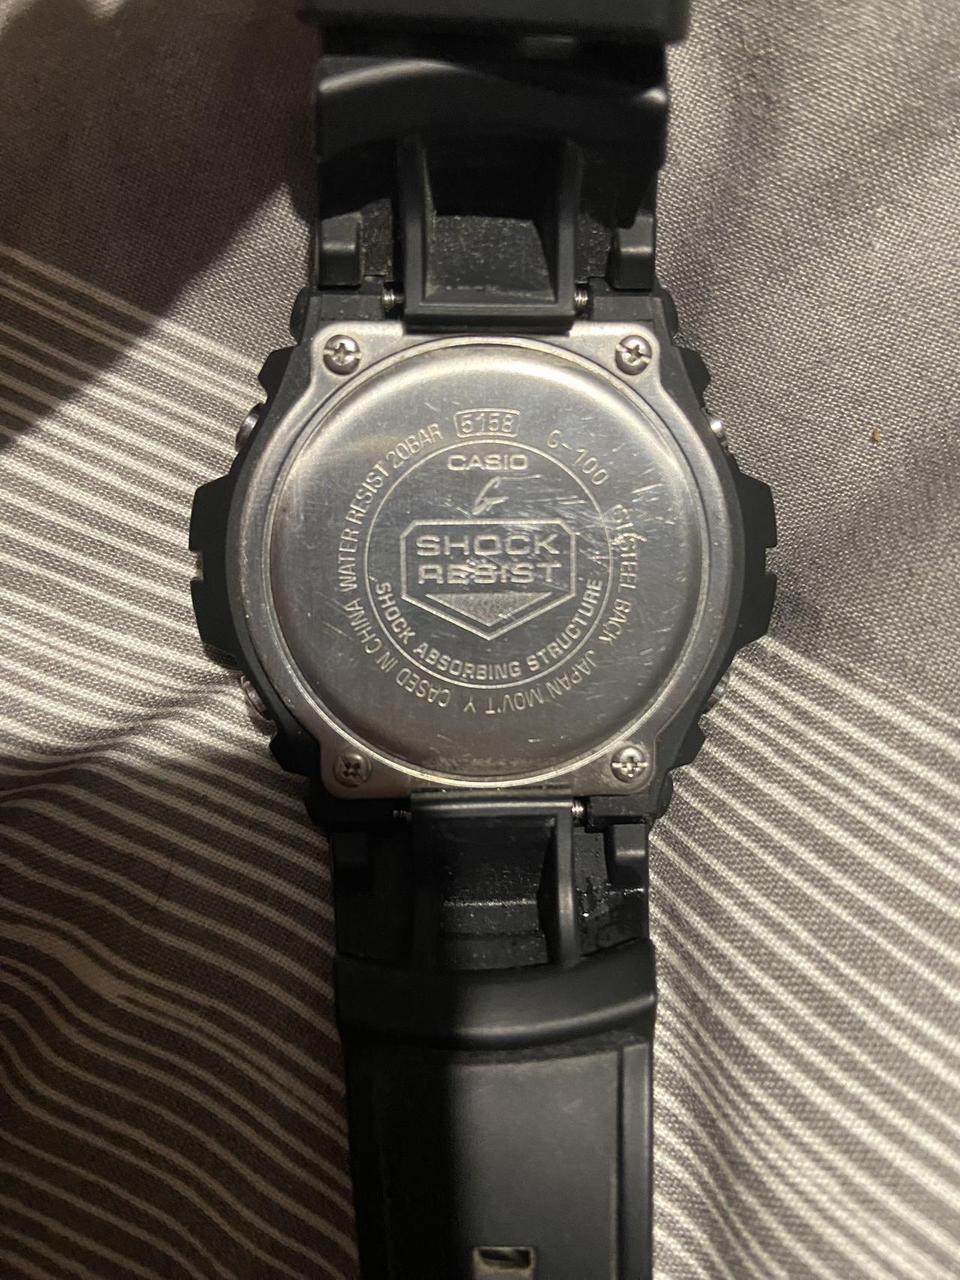 G-shock WR200m Perfect condition Brought as a... - Depop